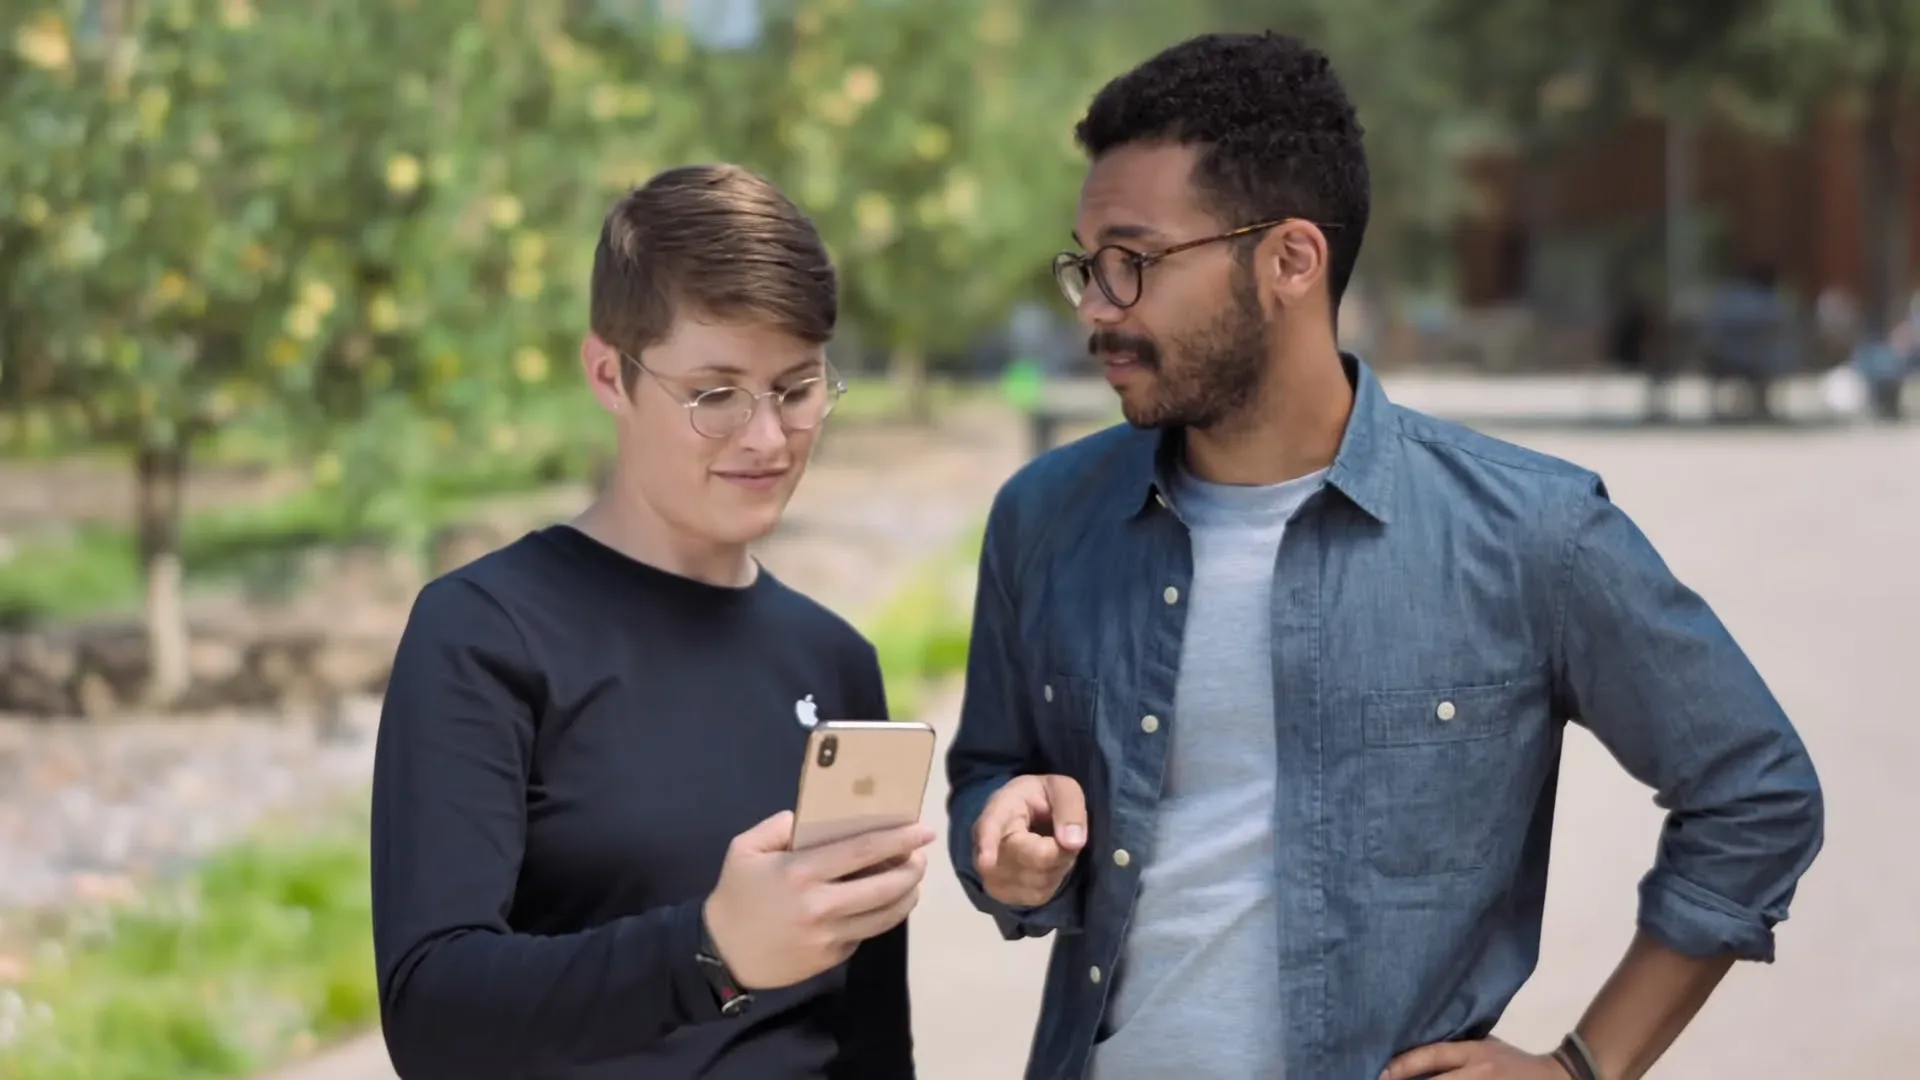 Guided Tour Of Iphone Xs, Xs Max And Xr With How-To Apple Watch Series 4